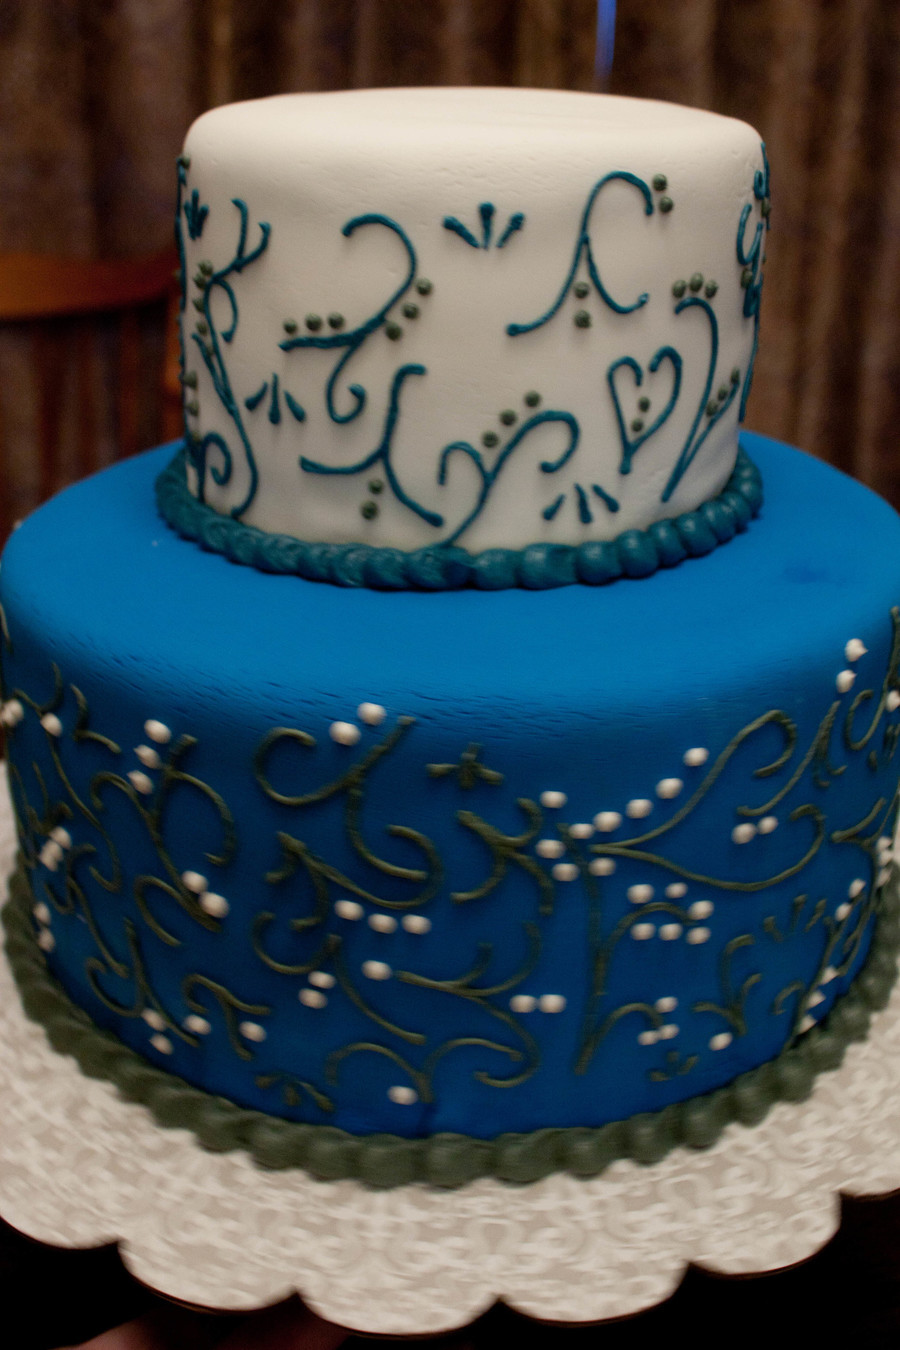 Chocolate Frosted Wedding Cakes
 Blue And White Wedding Cake Super Chocolate Cake And Cream